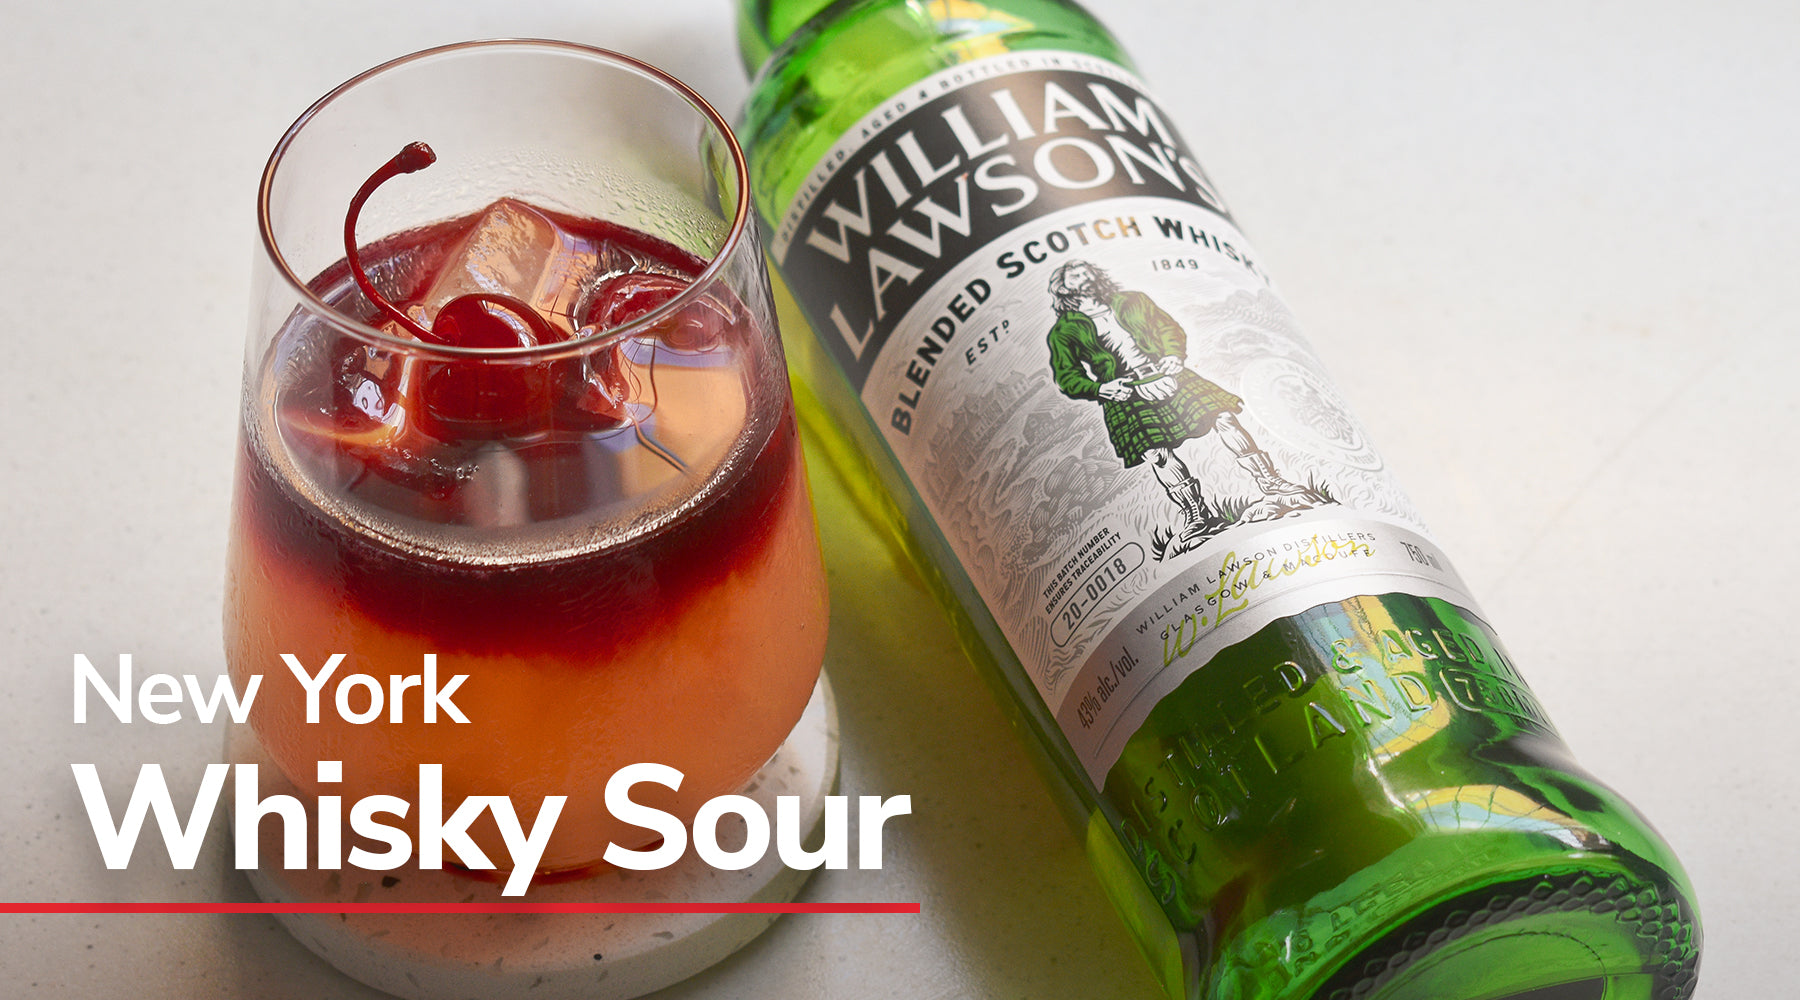 New York Whisky Sour with William Lawson's Scotch